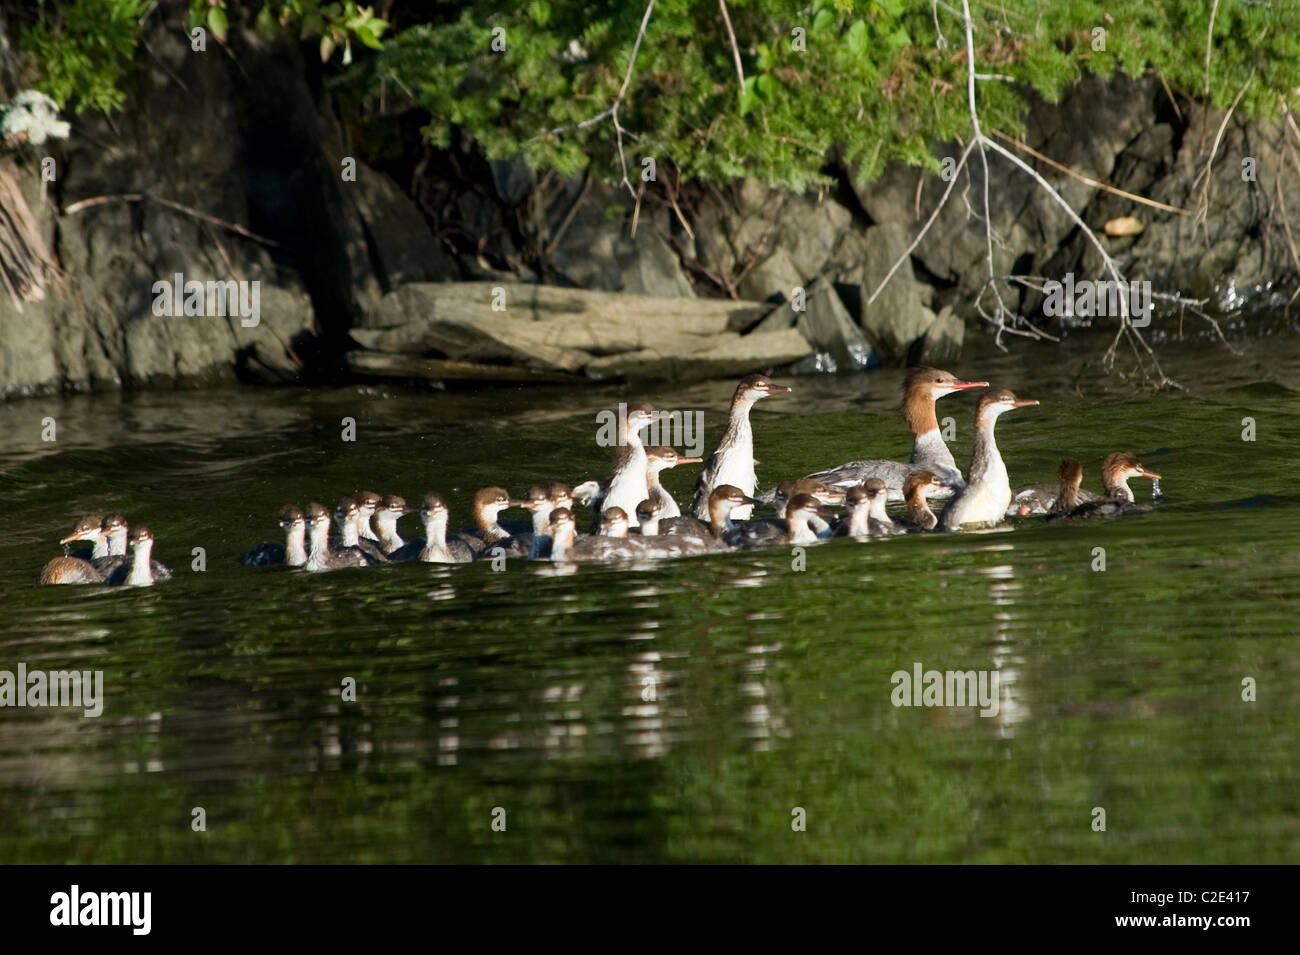 Lake Of The Woods, Ontario, Canada; Ducks And Ducklings On The Water Stock Photo